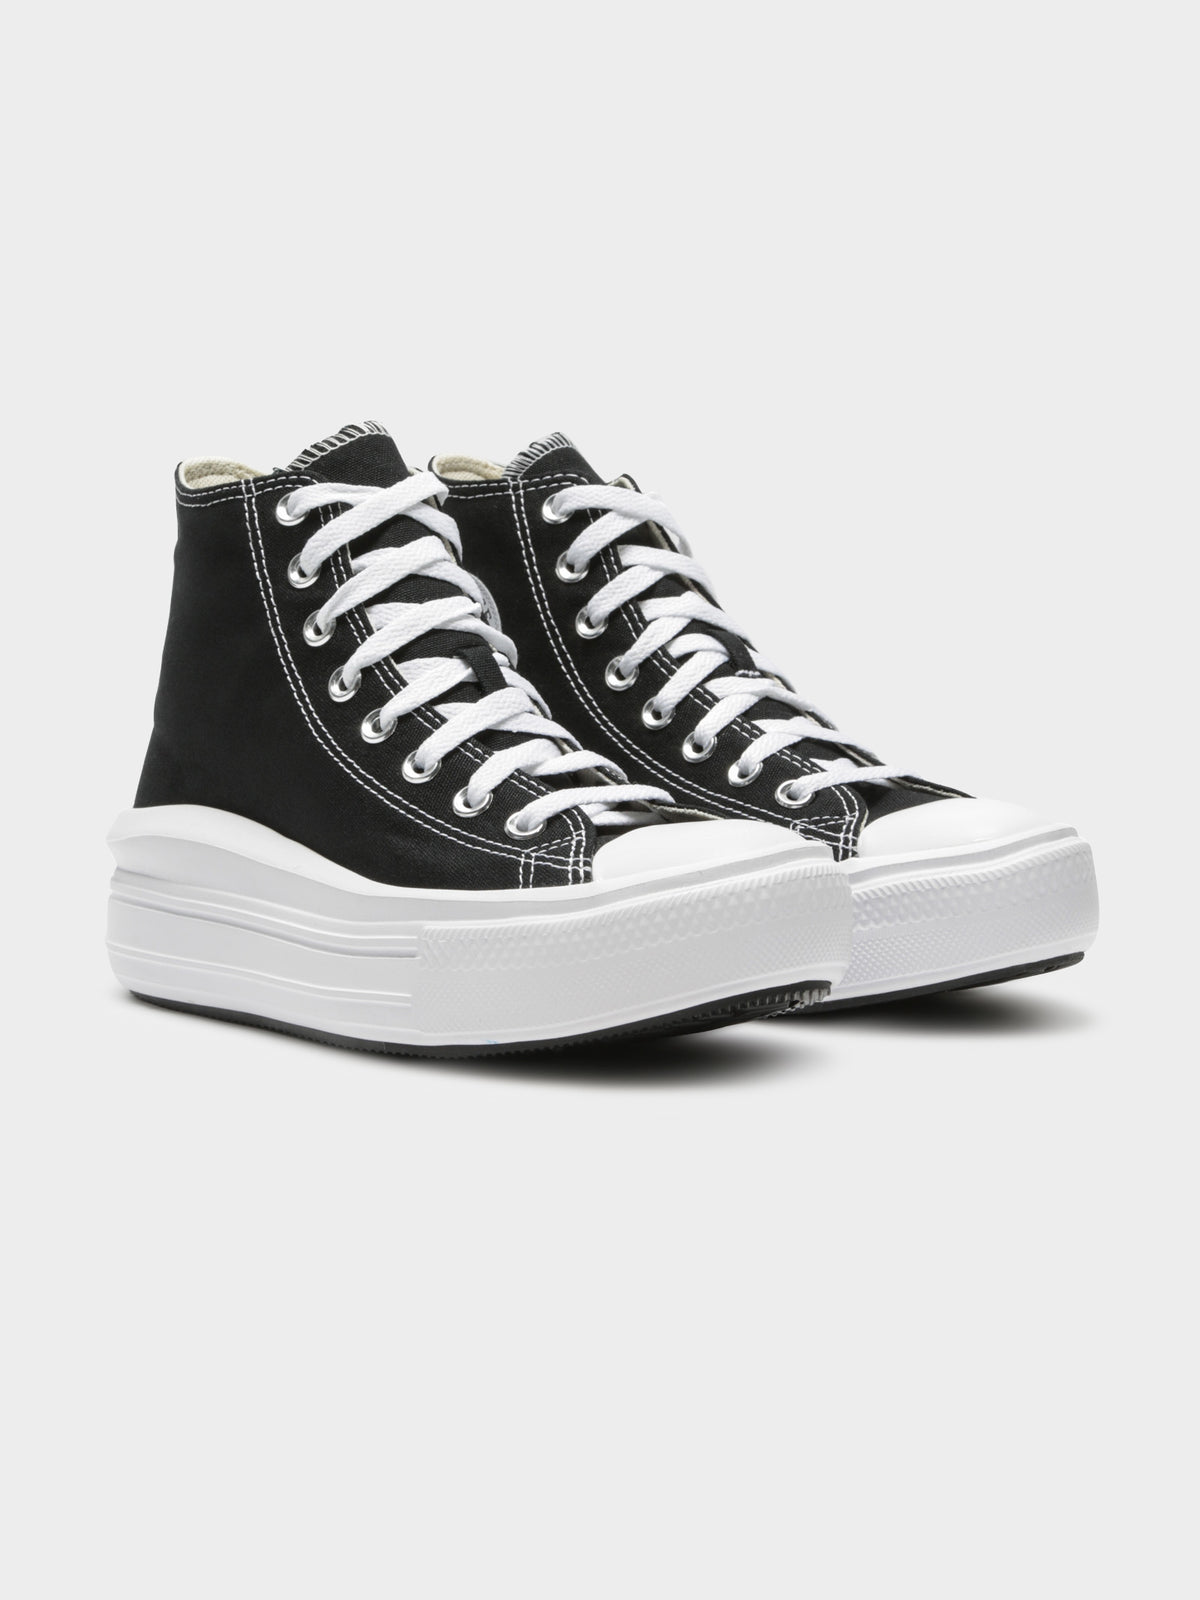 Womens Chuck Taylor Move Platform High Top Sneakers